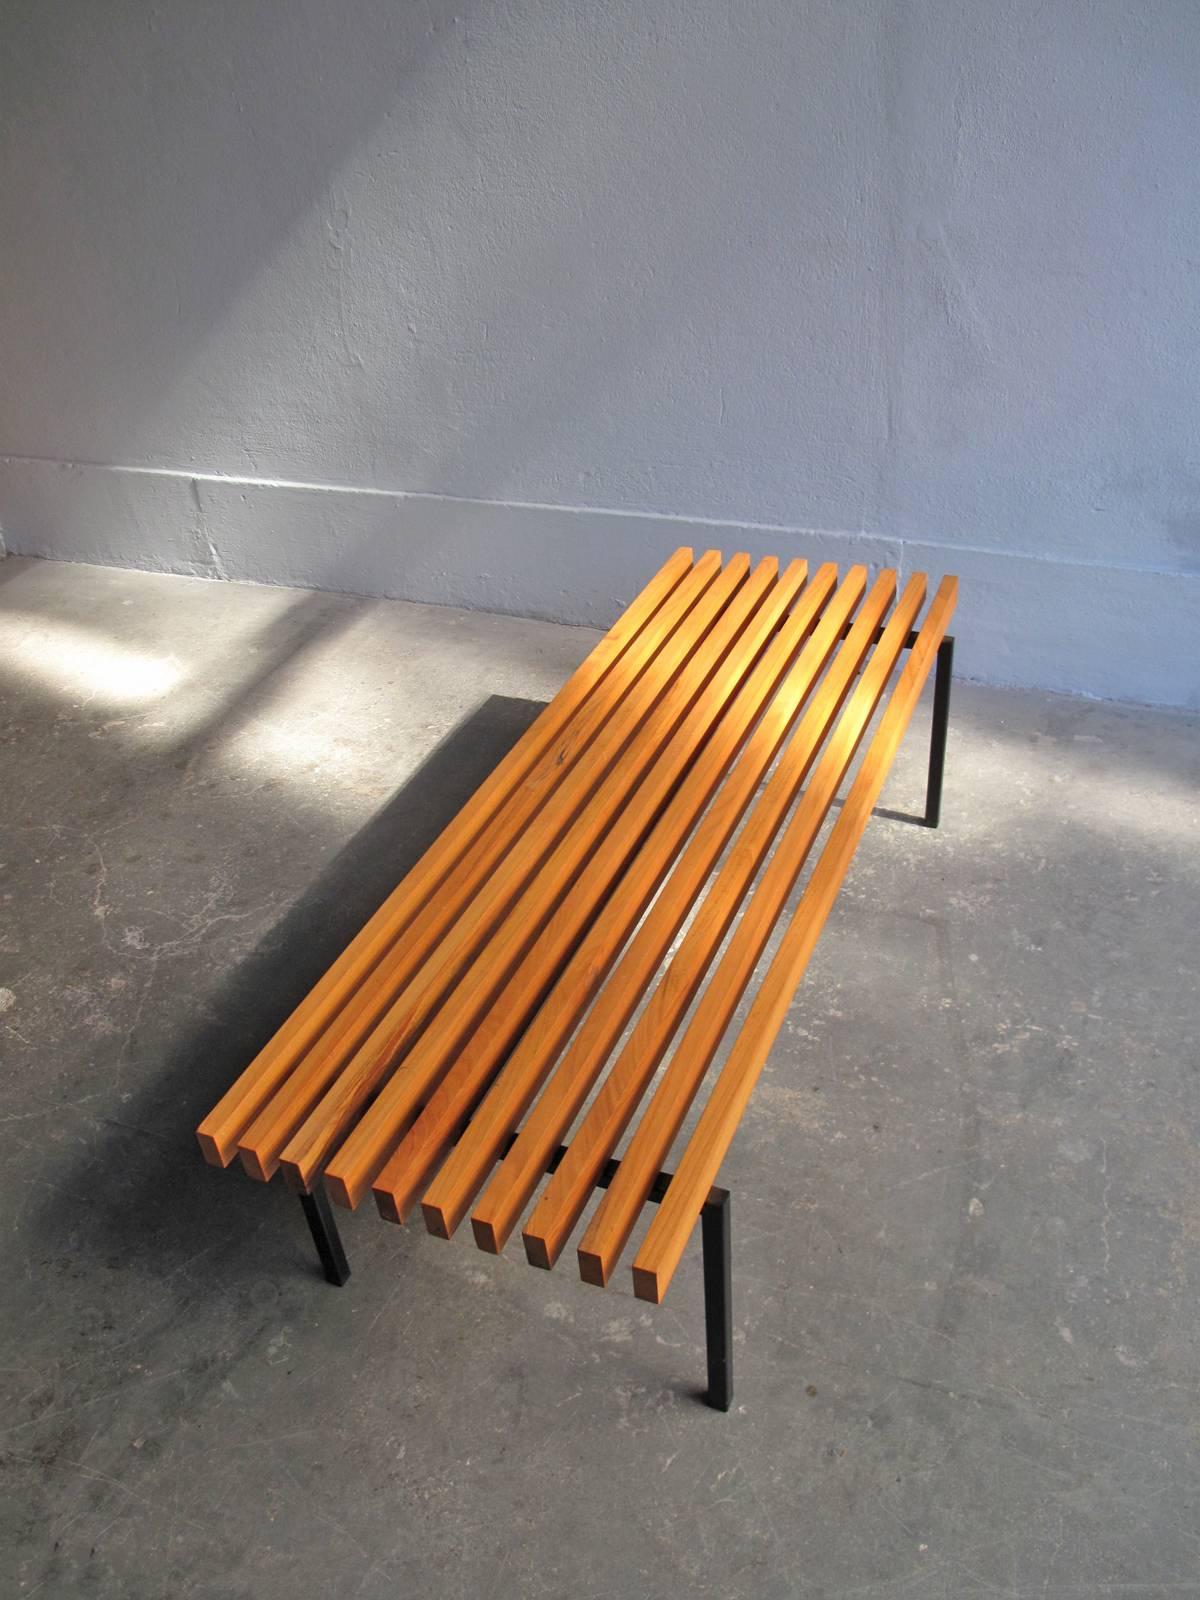 Sherry wood bars in a black lacquered metal base bench.